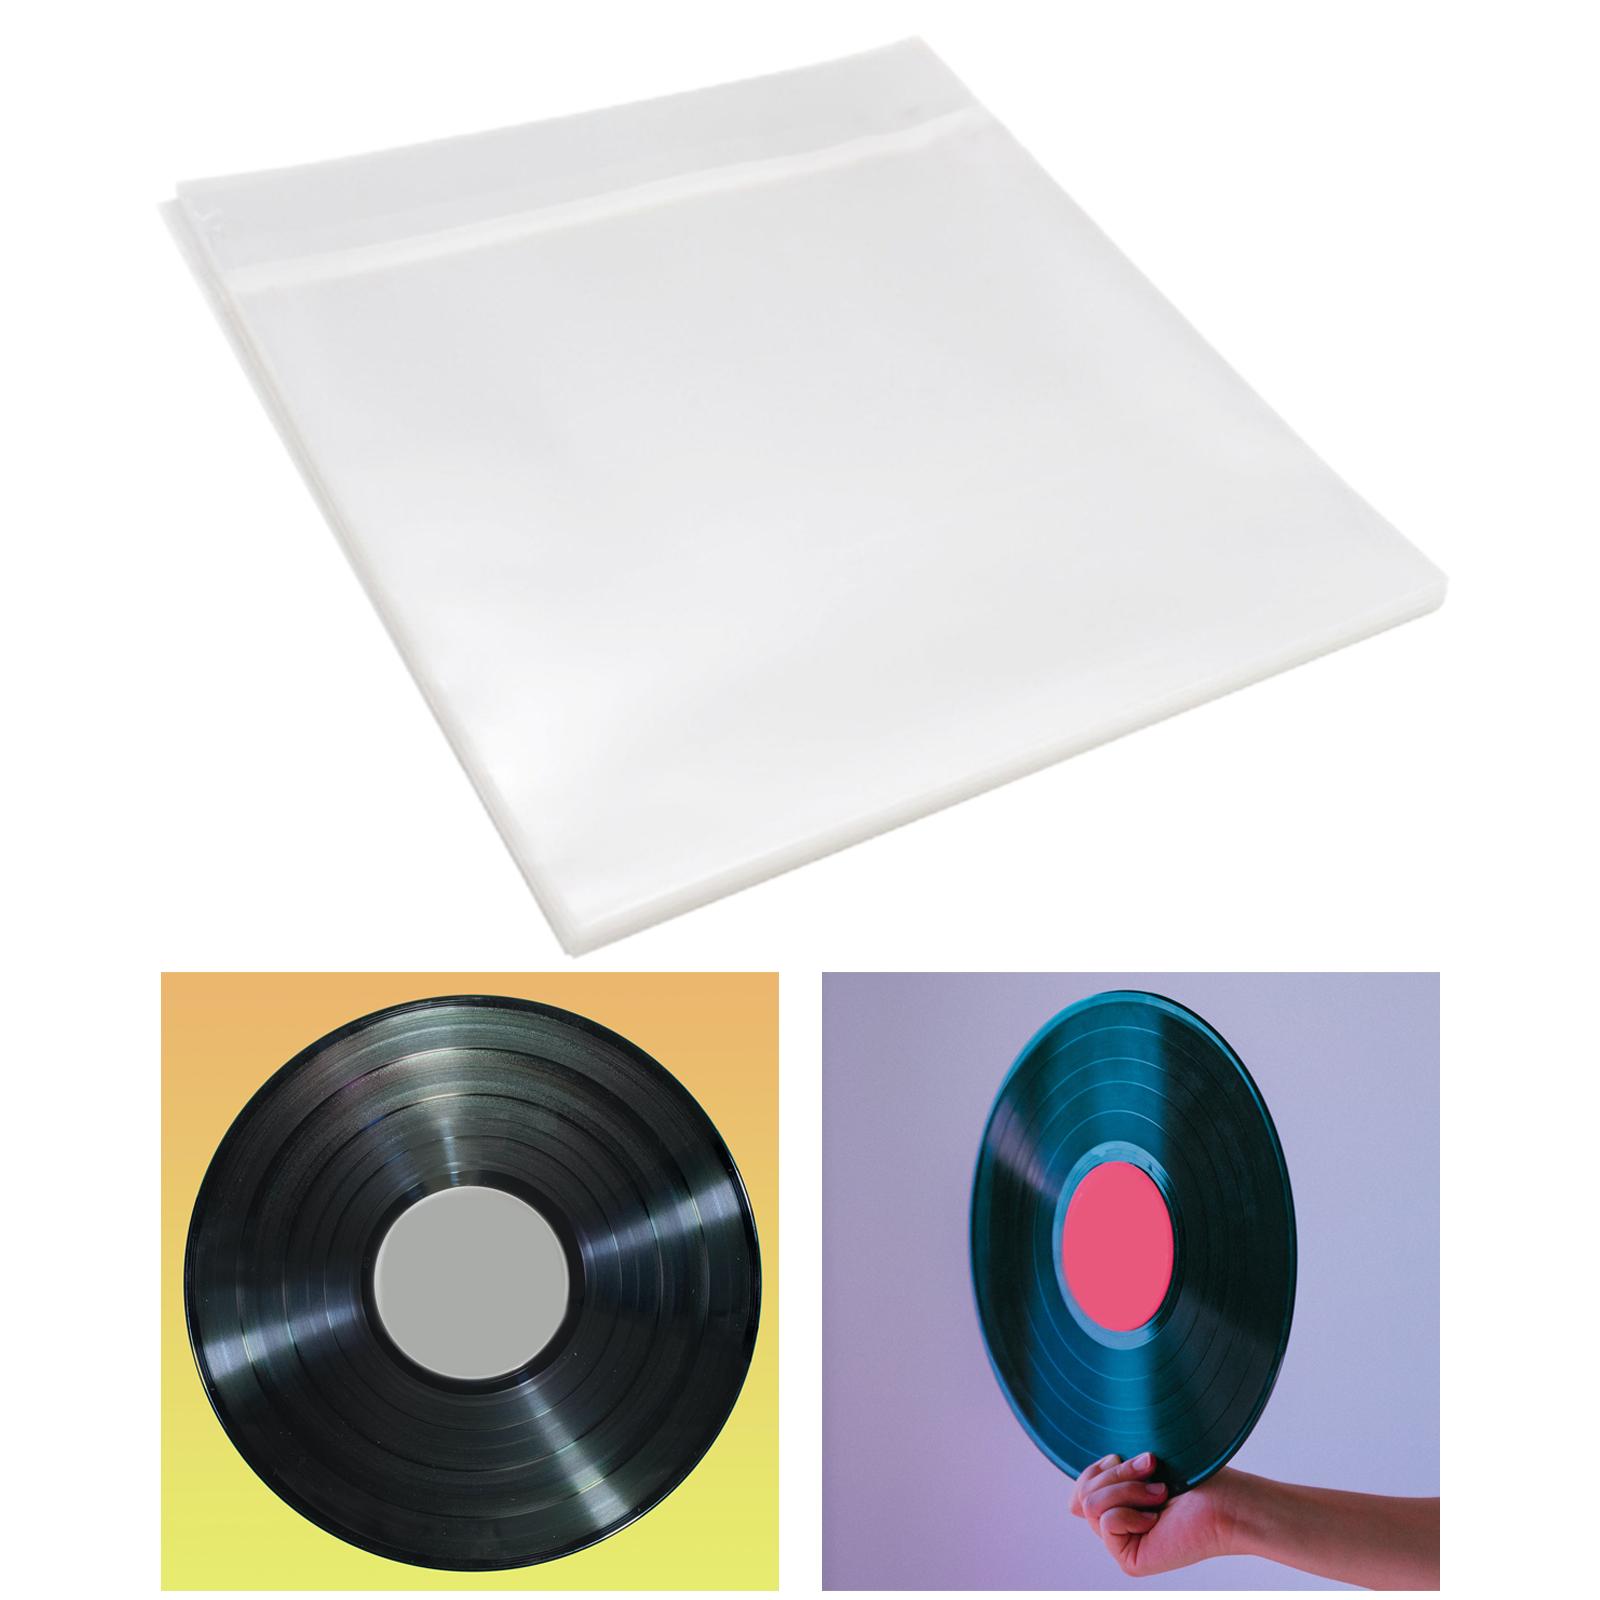 50Pcs Vinyl Record Sleeves Records Bag Reusable Clear for Turntable Player 10inch Recording